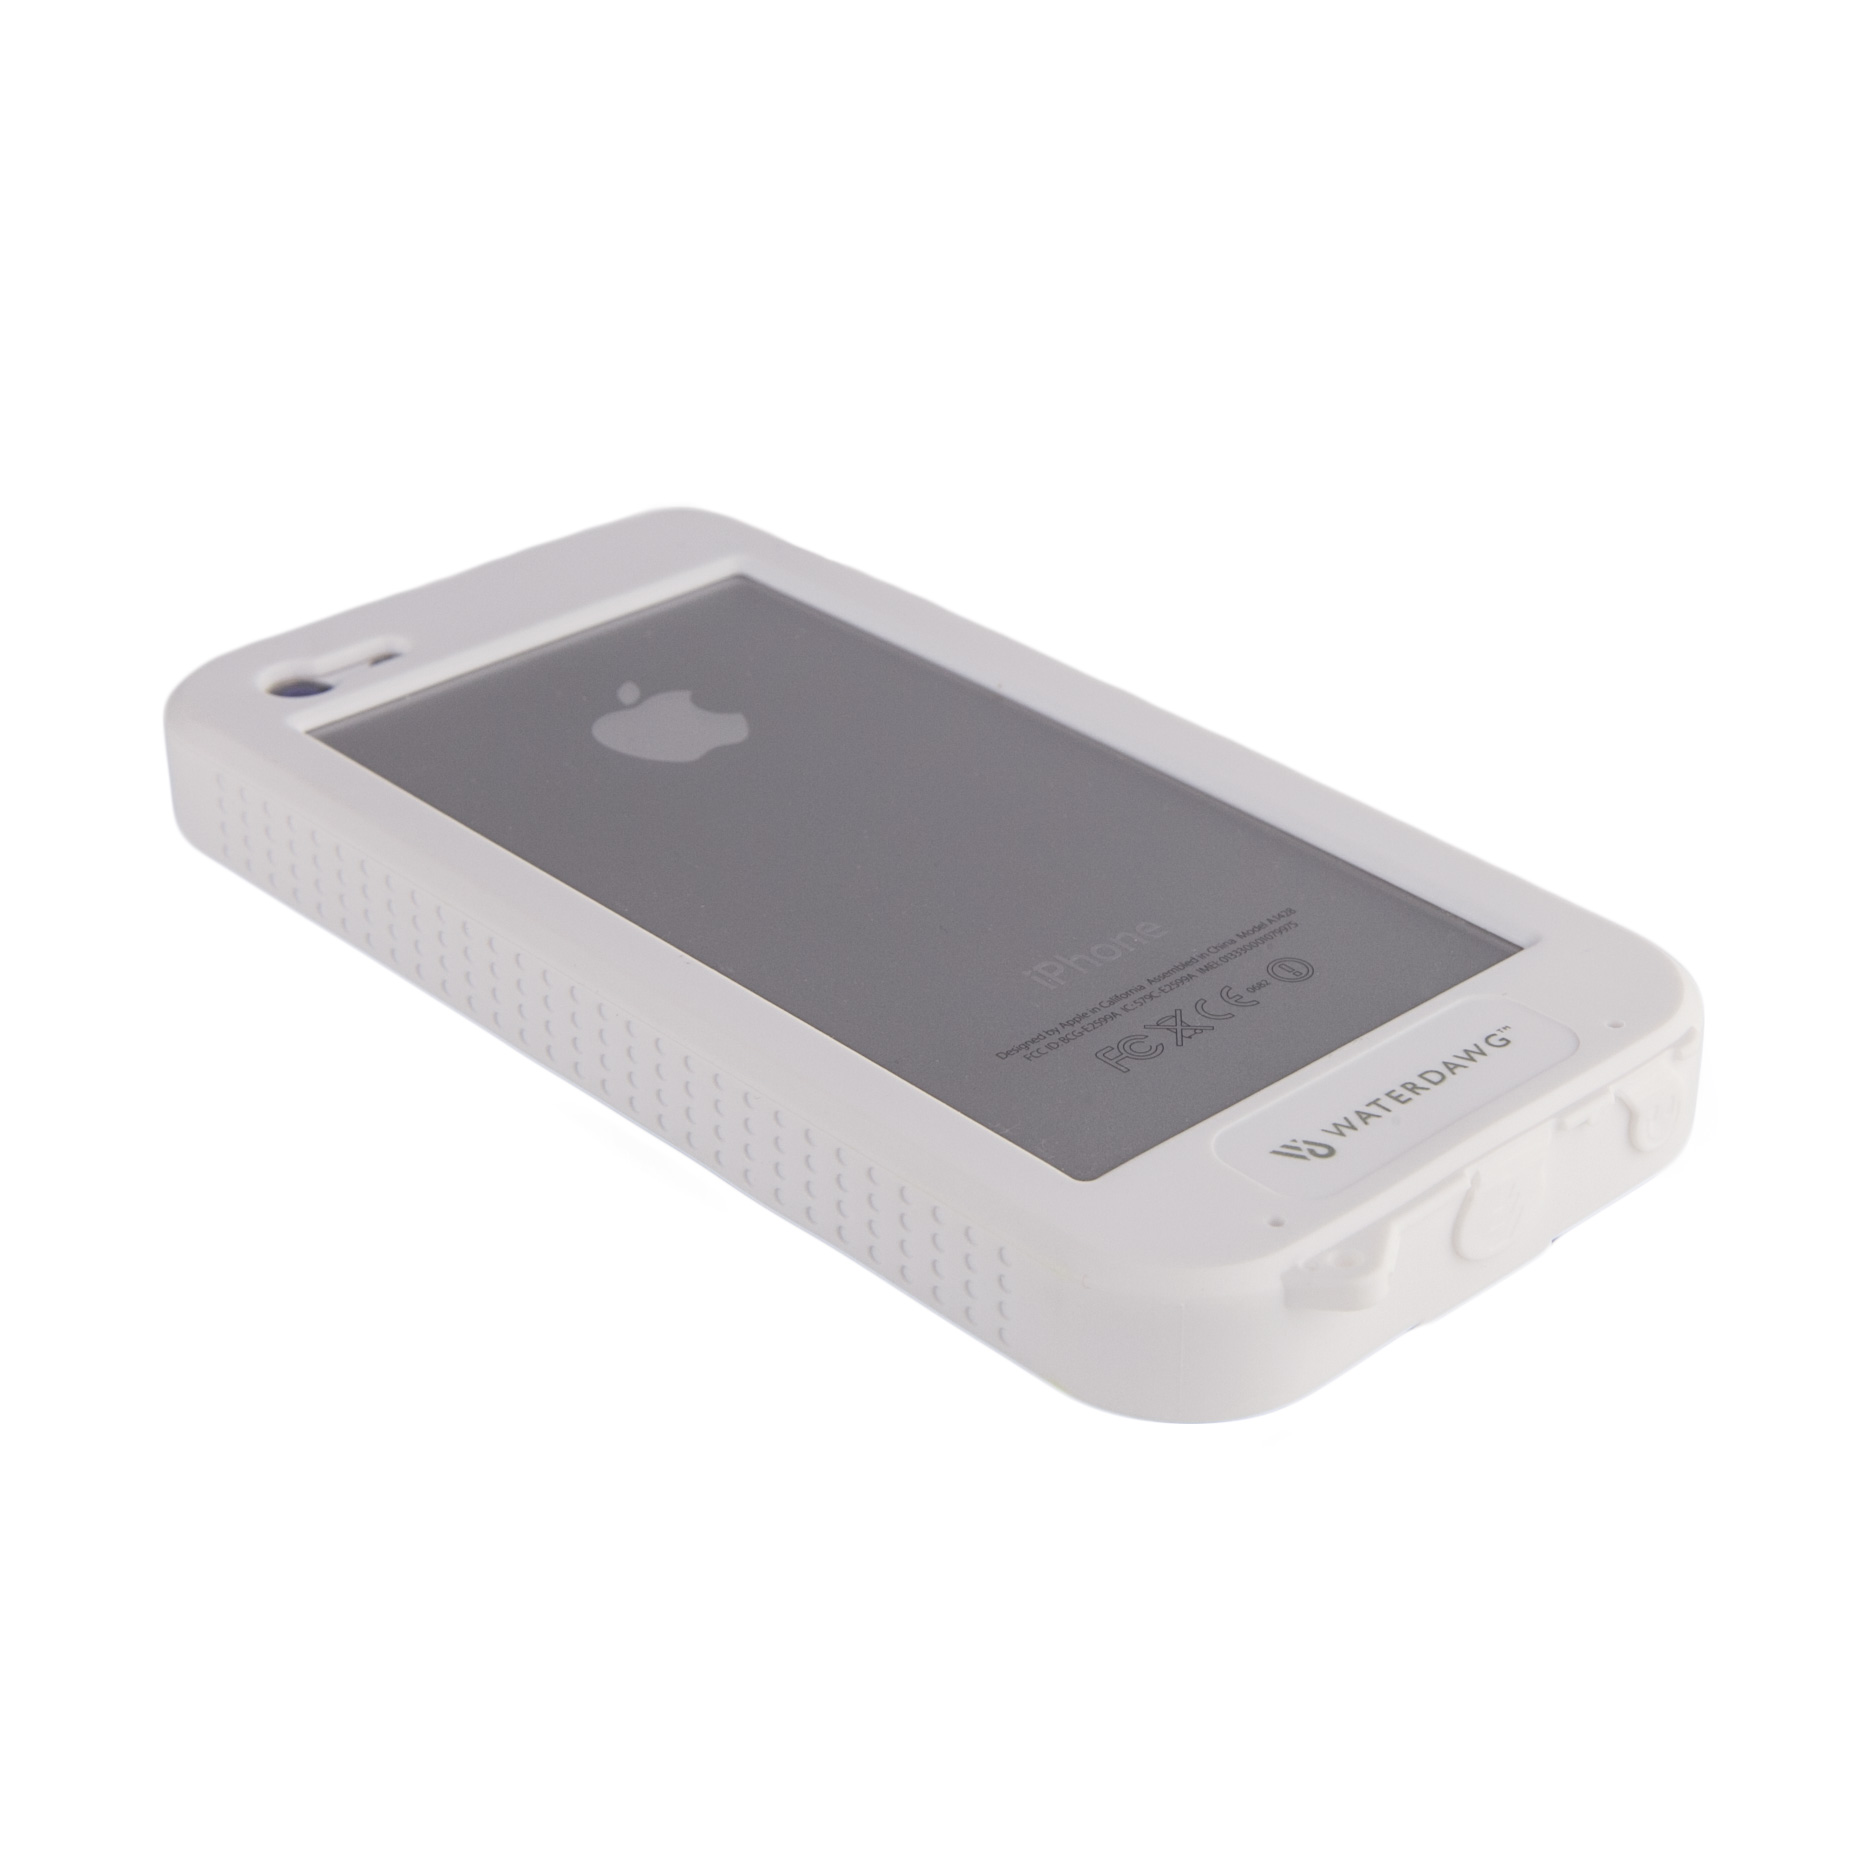 Dive Waterproof Case for iPhone 5 by WaterDawg